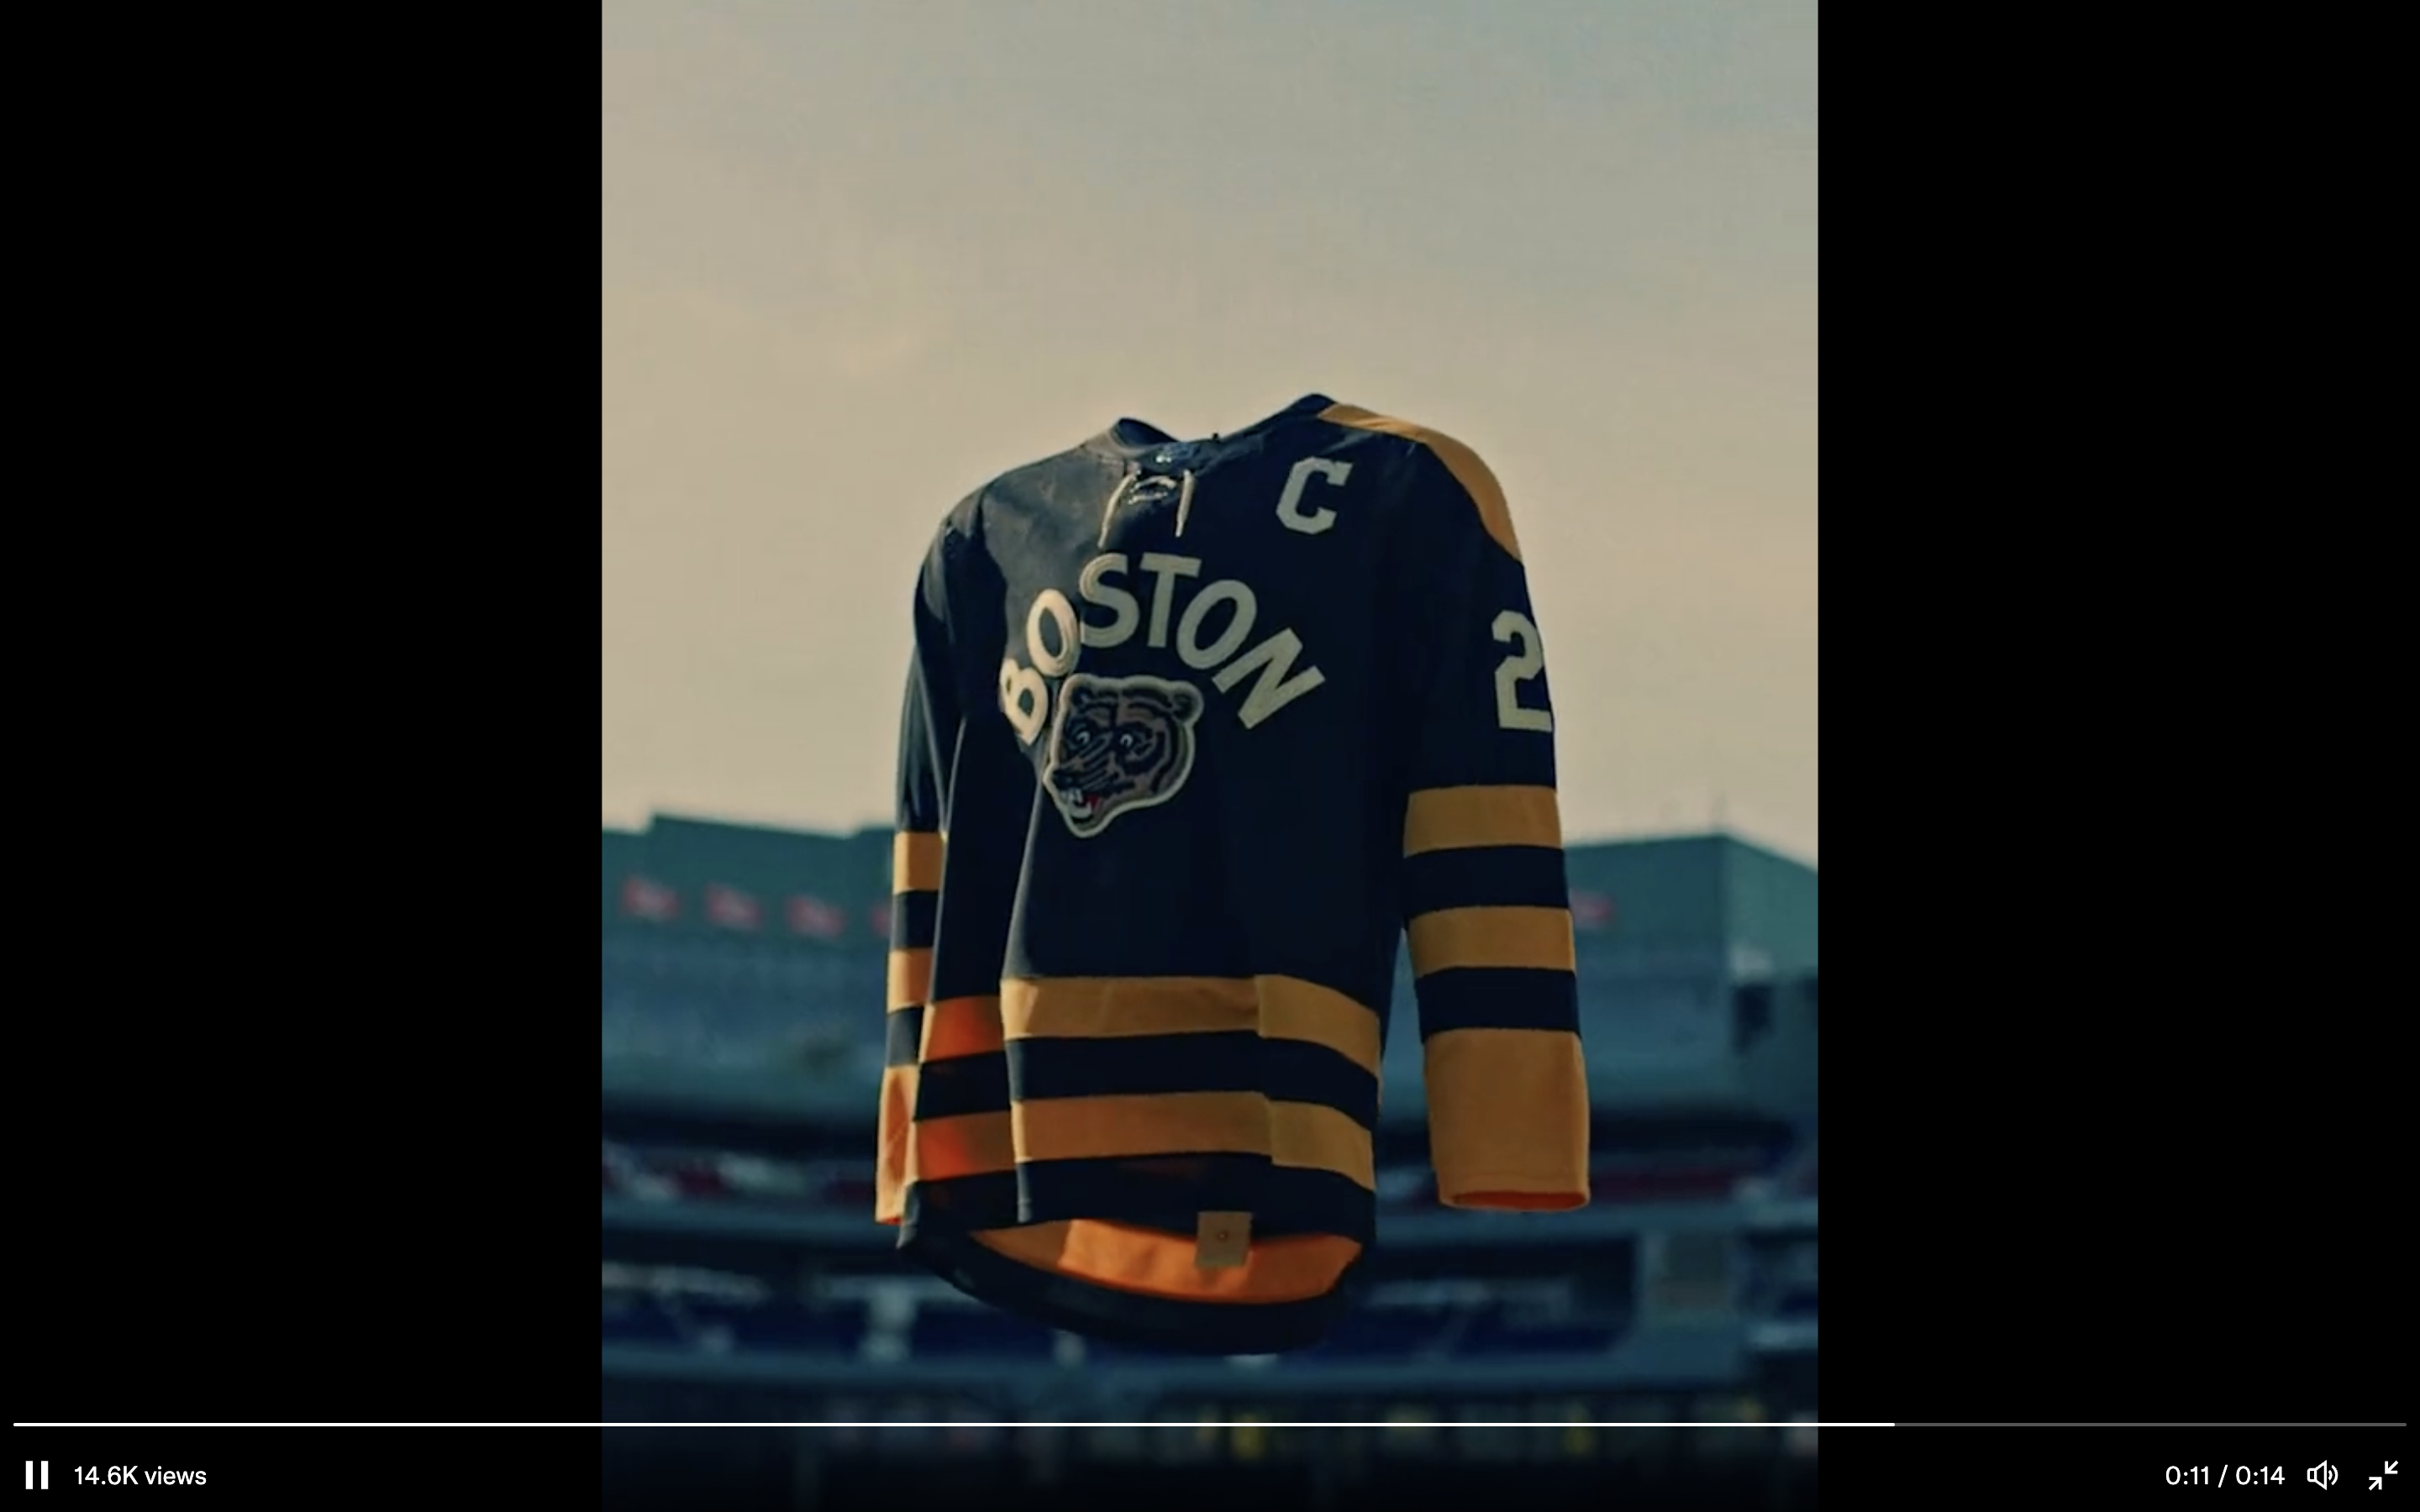 LOOK: Bruins, Penguins unveil jerseys for 2023 NHL Winter Classic 